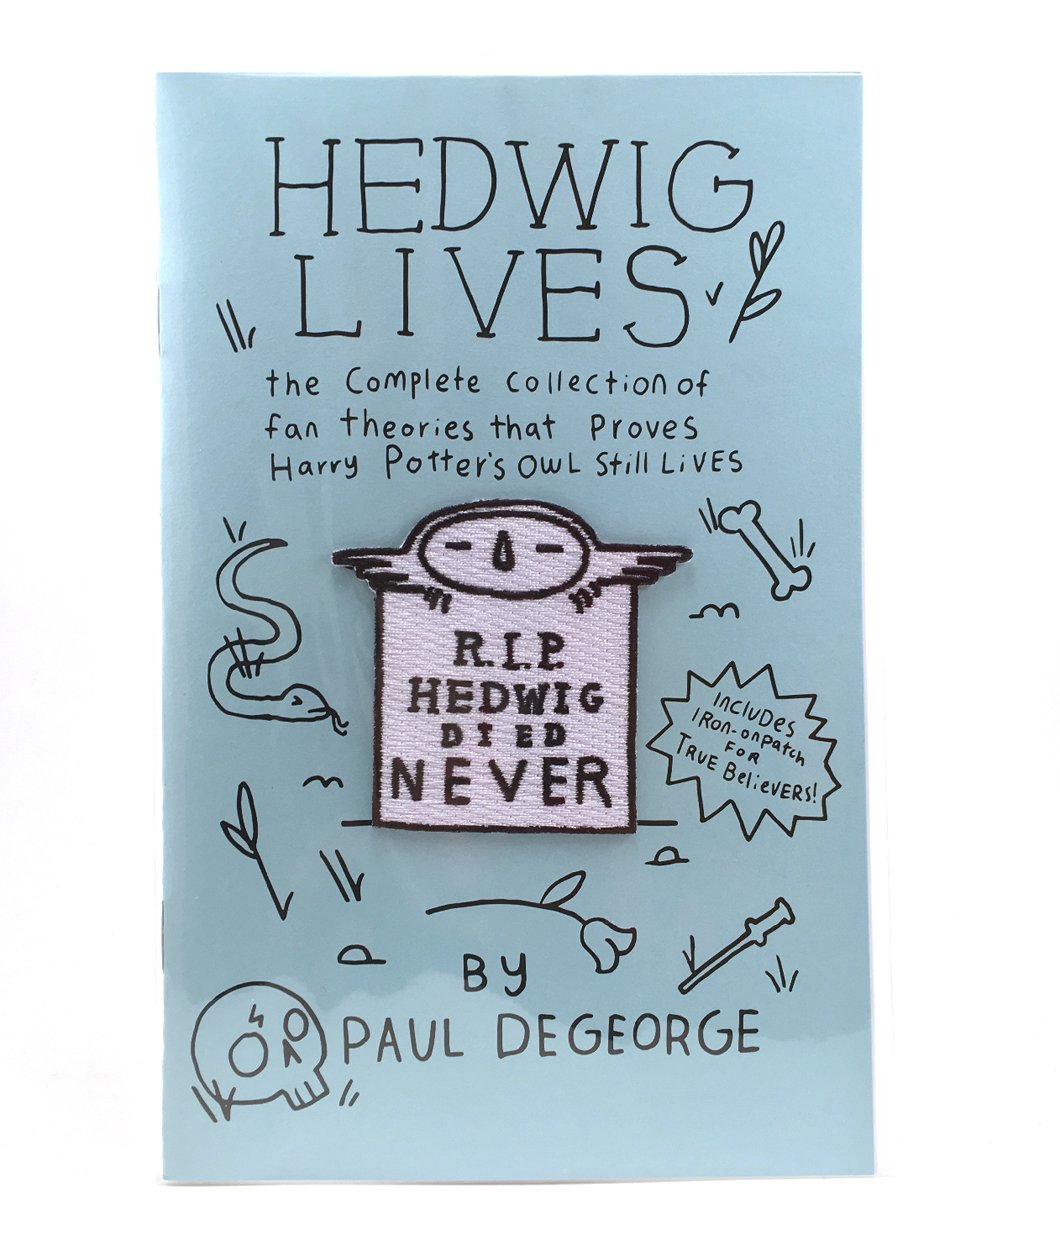 R.I.P. Hedwig, Died Never patch